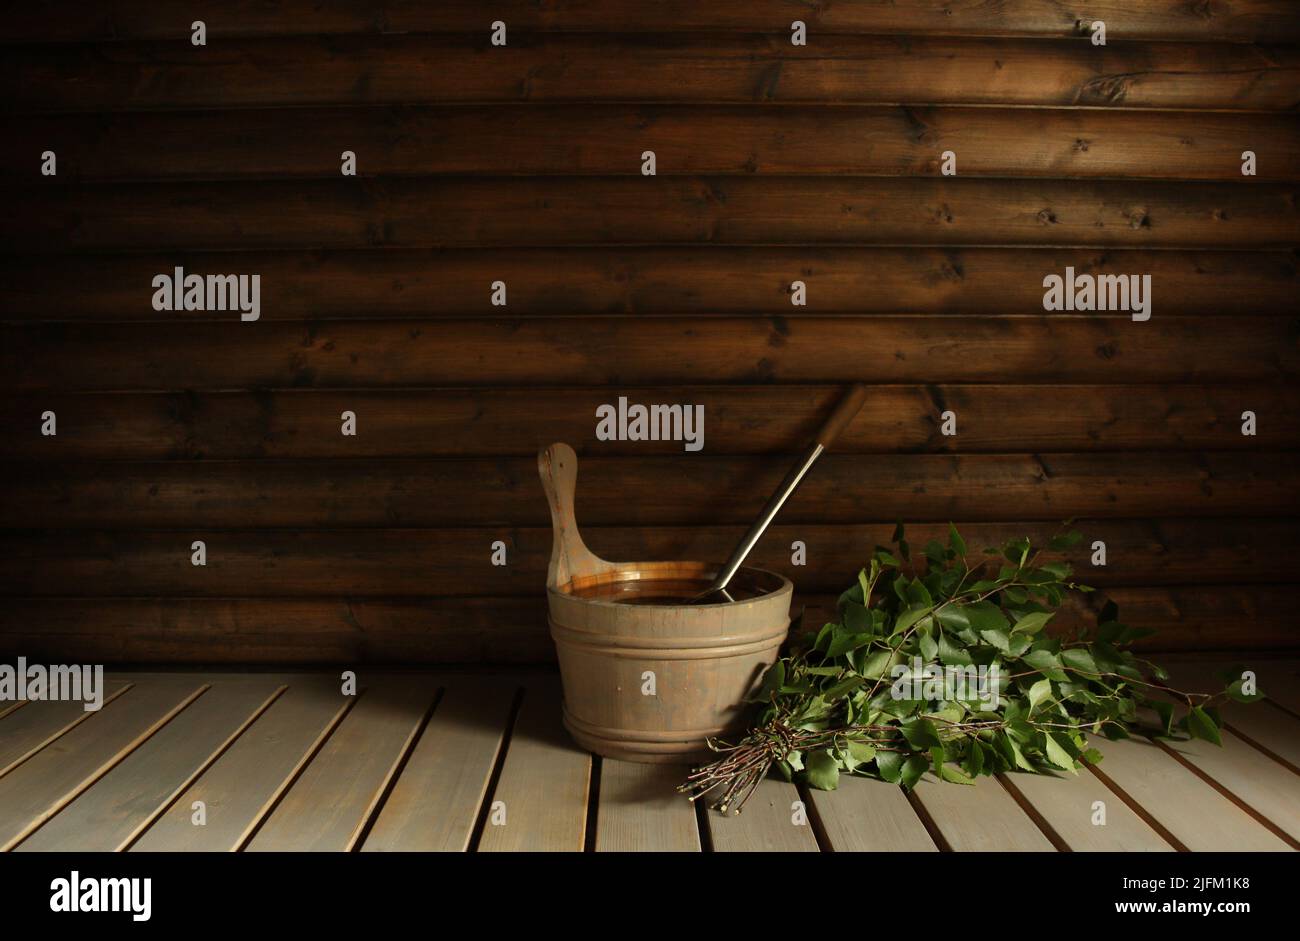 https://c8.alamy.com/comp/2JFM1K8/a-birch-bath-whisk-vihta-and-a-water-pail-ready-for-bathers-in-a-finnish-sauna-room-for-copy-2JFM1K8.jpg